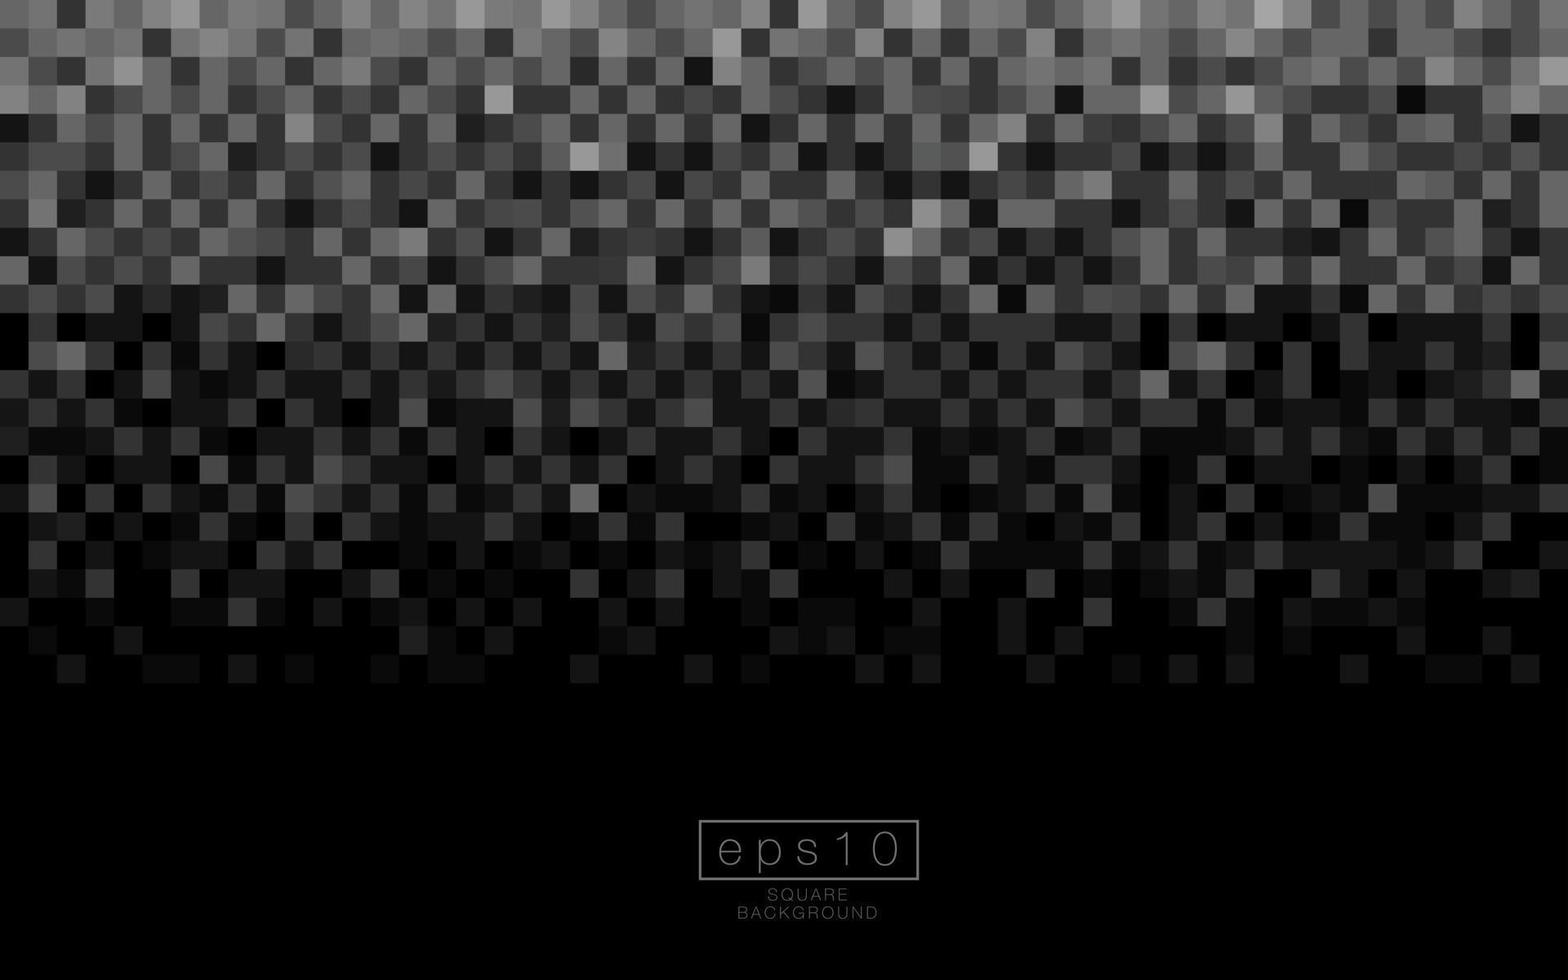 Abstract dark background of squares or pixels in shades of black and grey colors. Mosaic style. Digital. cell. Geometry template. Vector illustration.